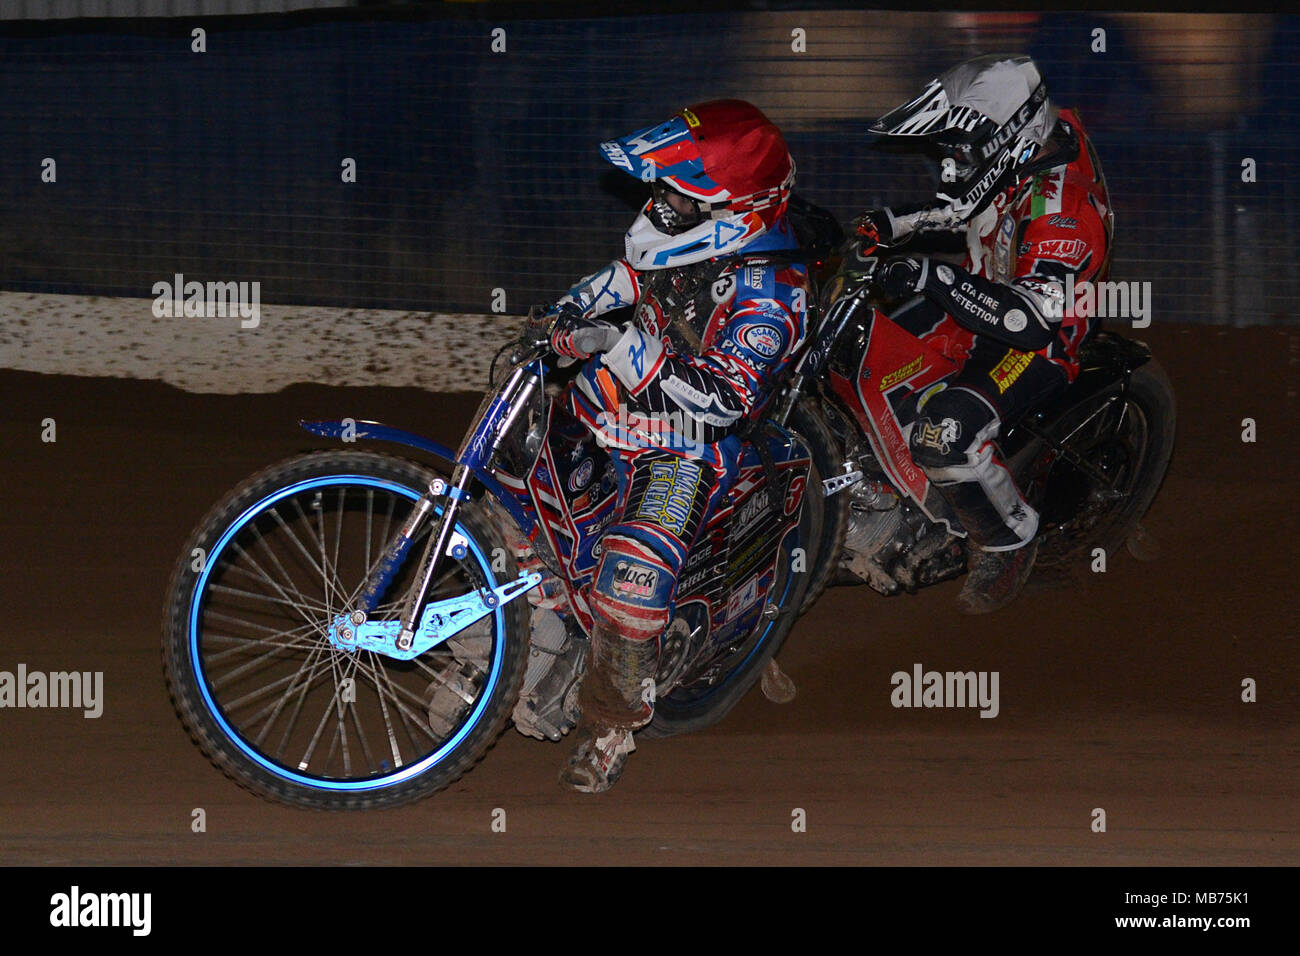 Plymouth, UK. 6th April, 2018. Plymouth Devils Henry Atkins and Kent Kings Nathan Stoneman in close company during heat 12 of the National Trophy meeting between the two teams. Nick Truscott Photography Ltd Credit: Nicholas Truscott/Alamy Live News Stock Photo